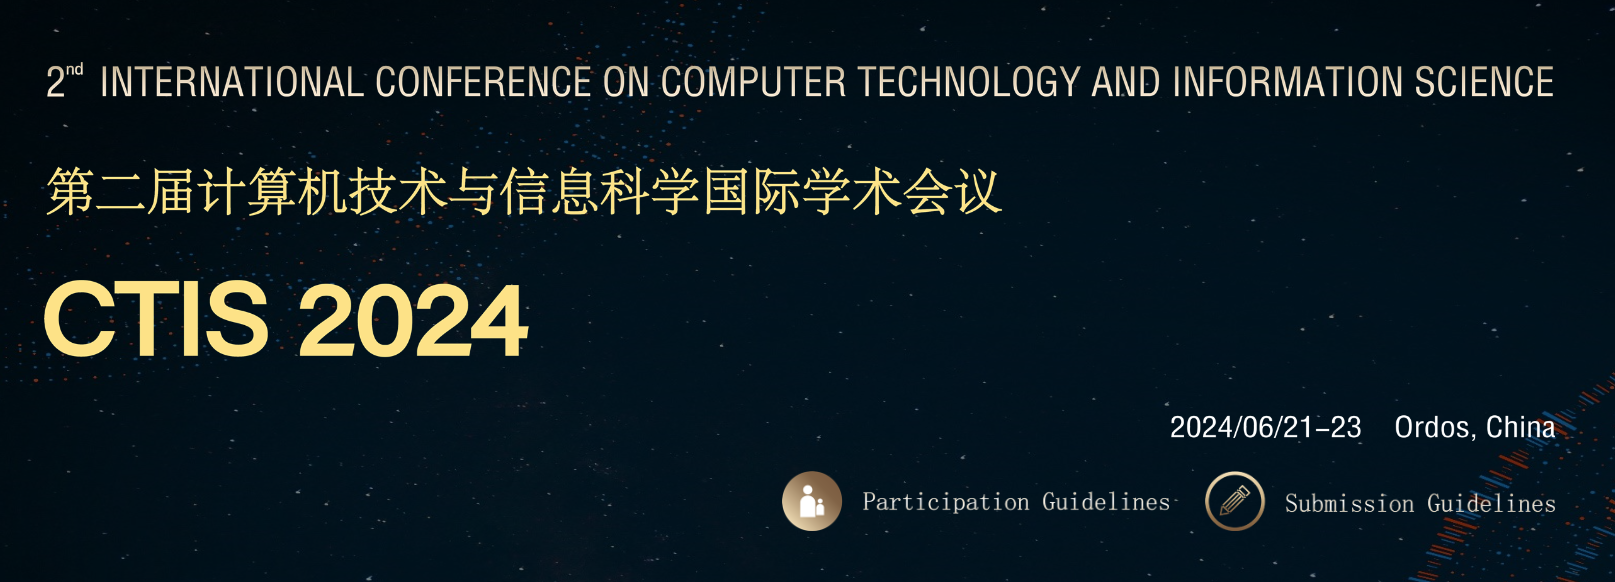 The 2nd International Conference on Computer Technology and Information Science (CTIS 2024)